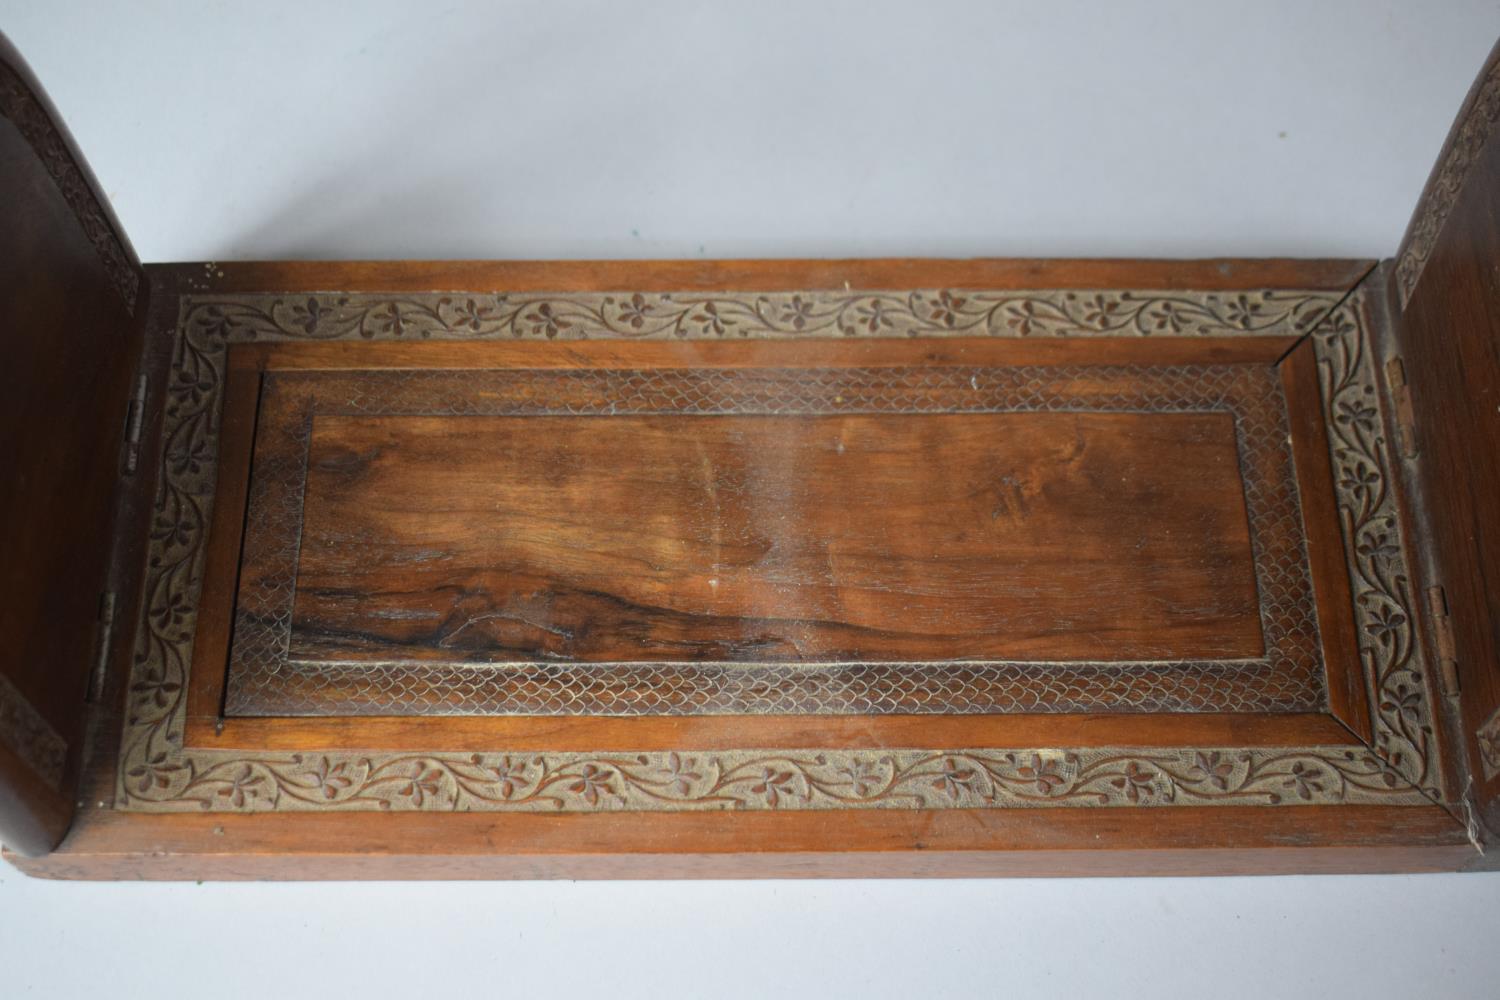 A Nicely Carved Indian Hardwood Book Slide, 33cm Long When Closed - Image 3 of 3